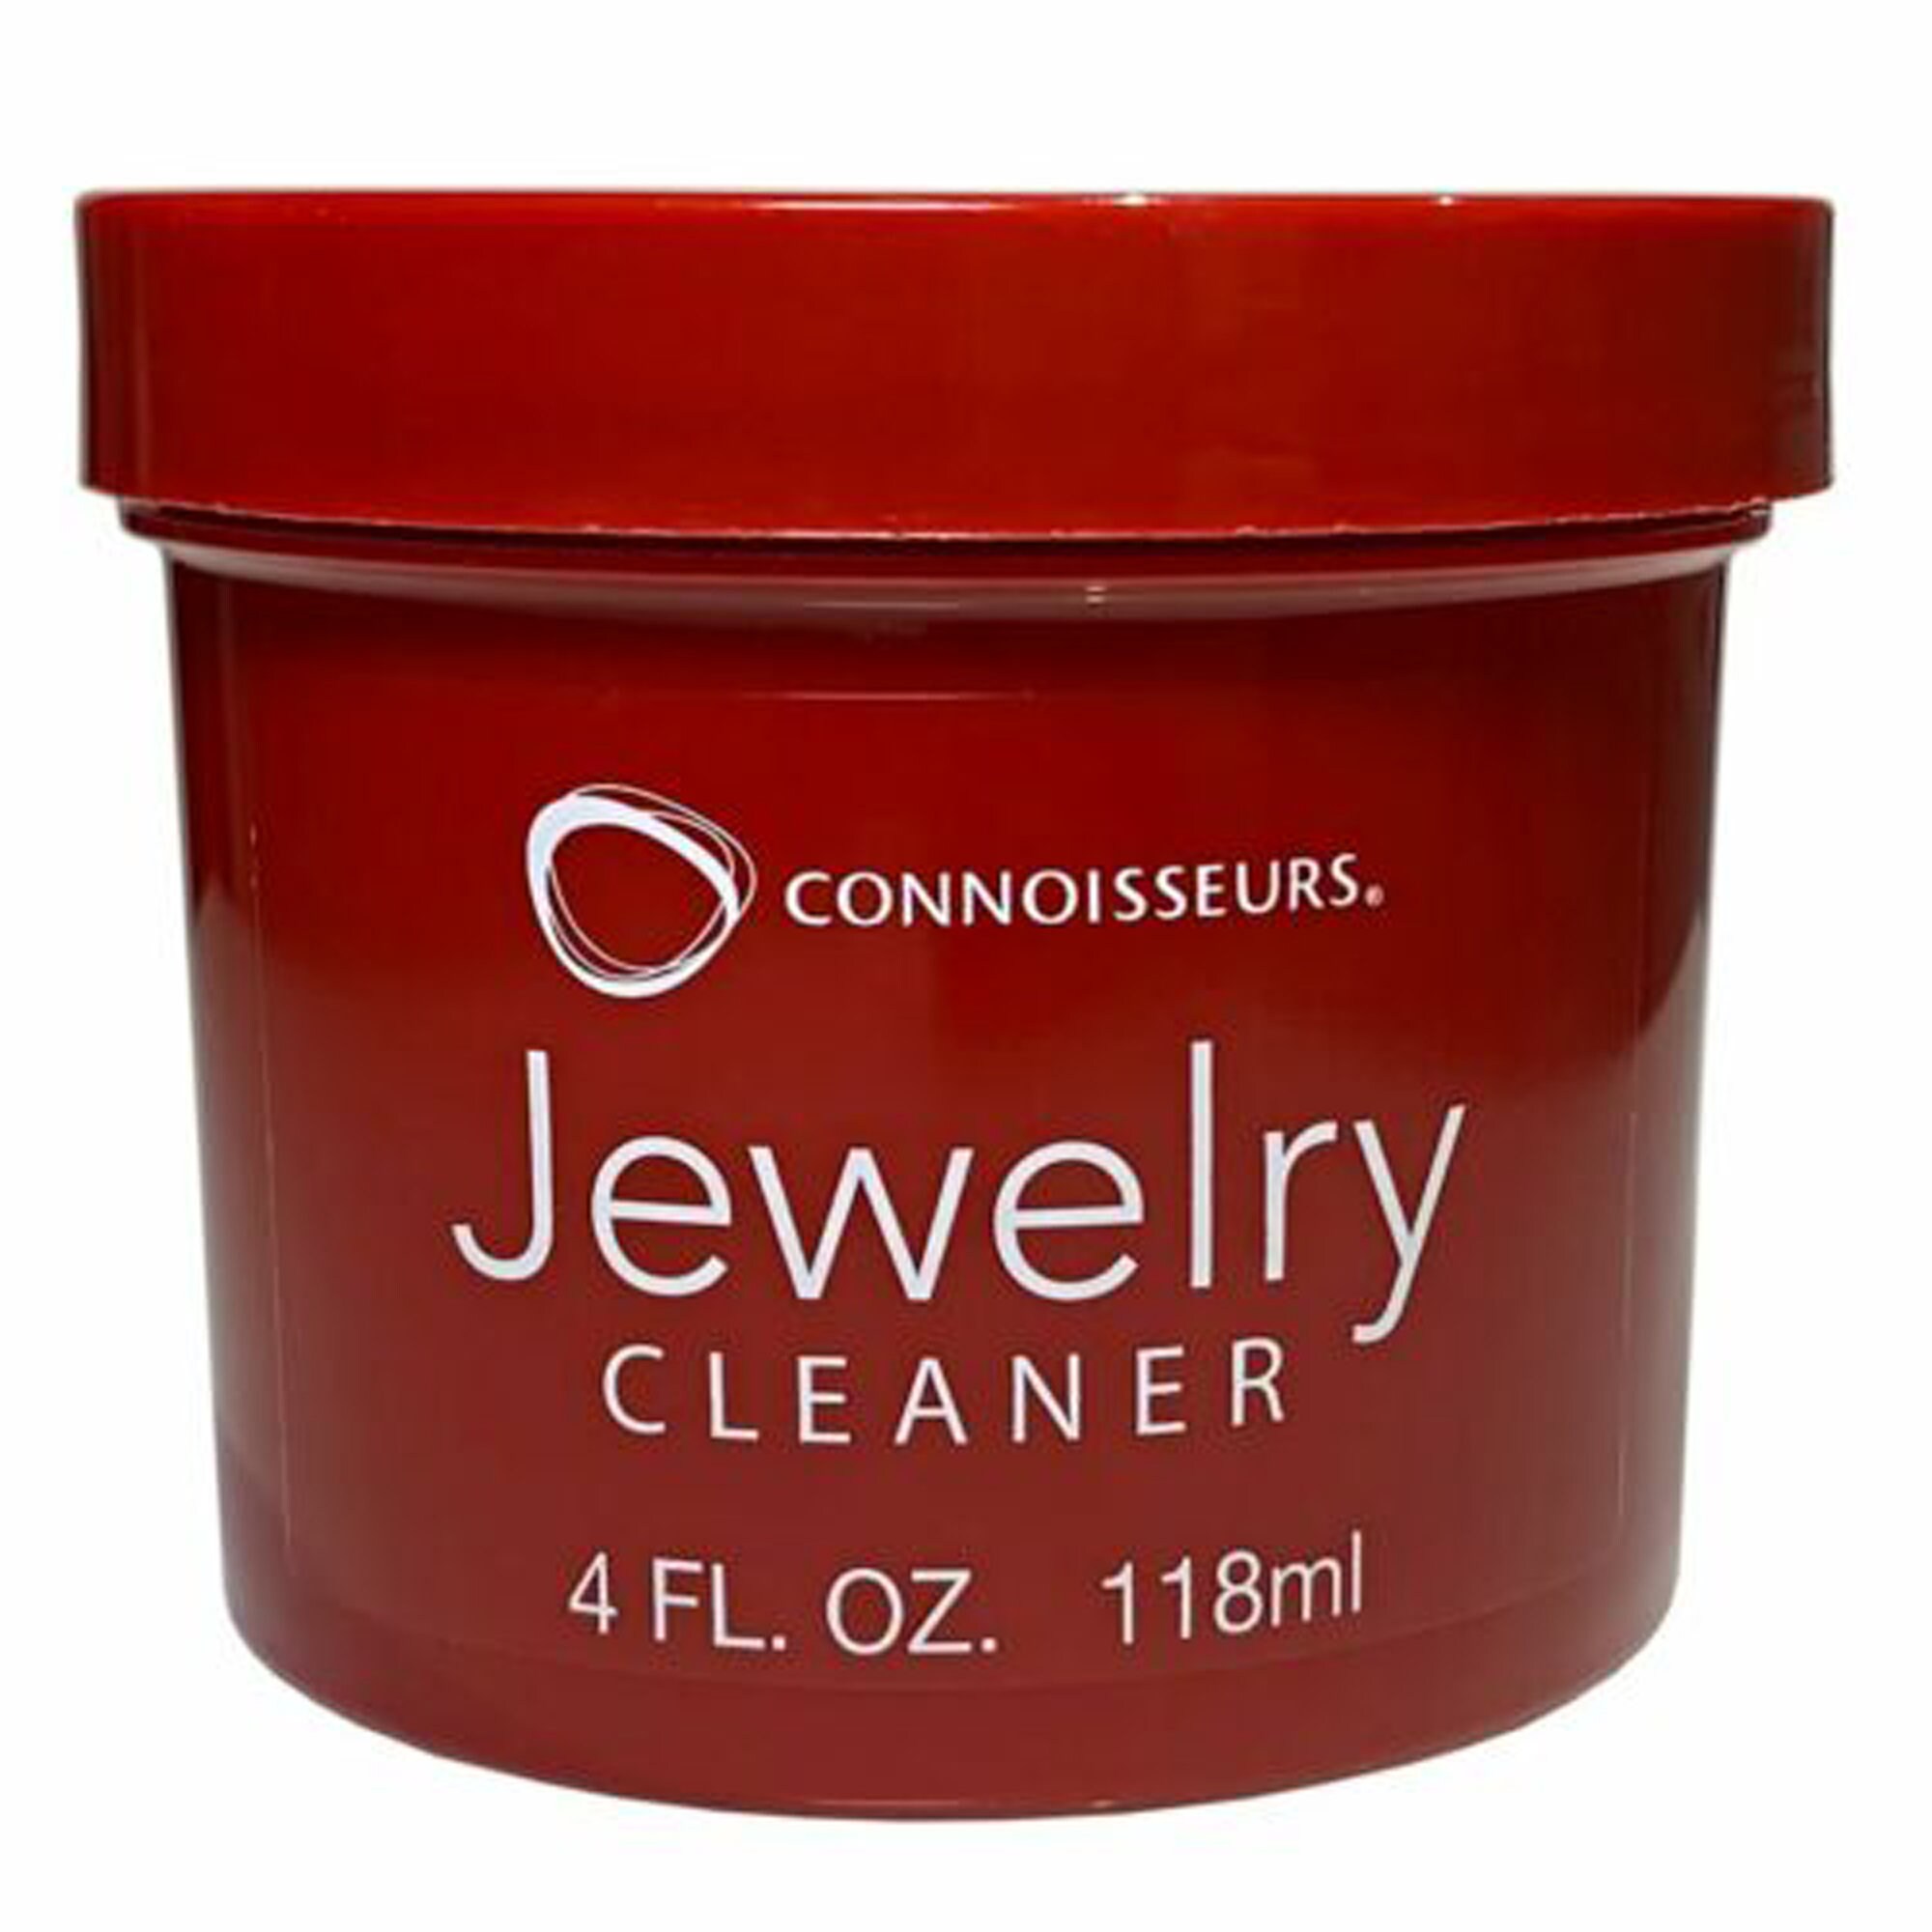 Connoisseurs Jewelry Wipes, Jewelry Cleaner, Silver Cleaner, Gold